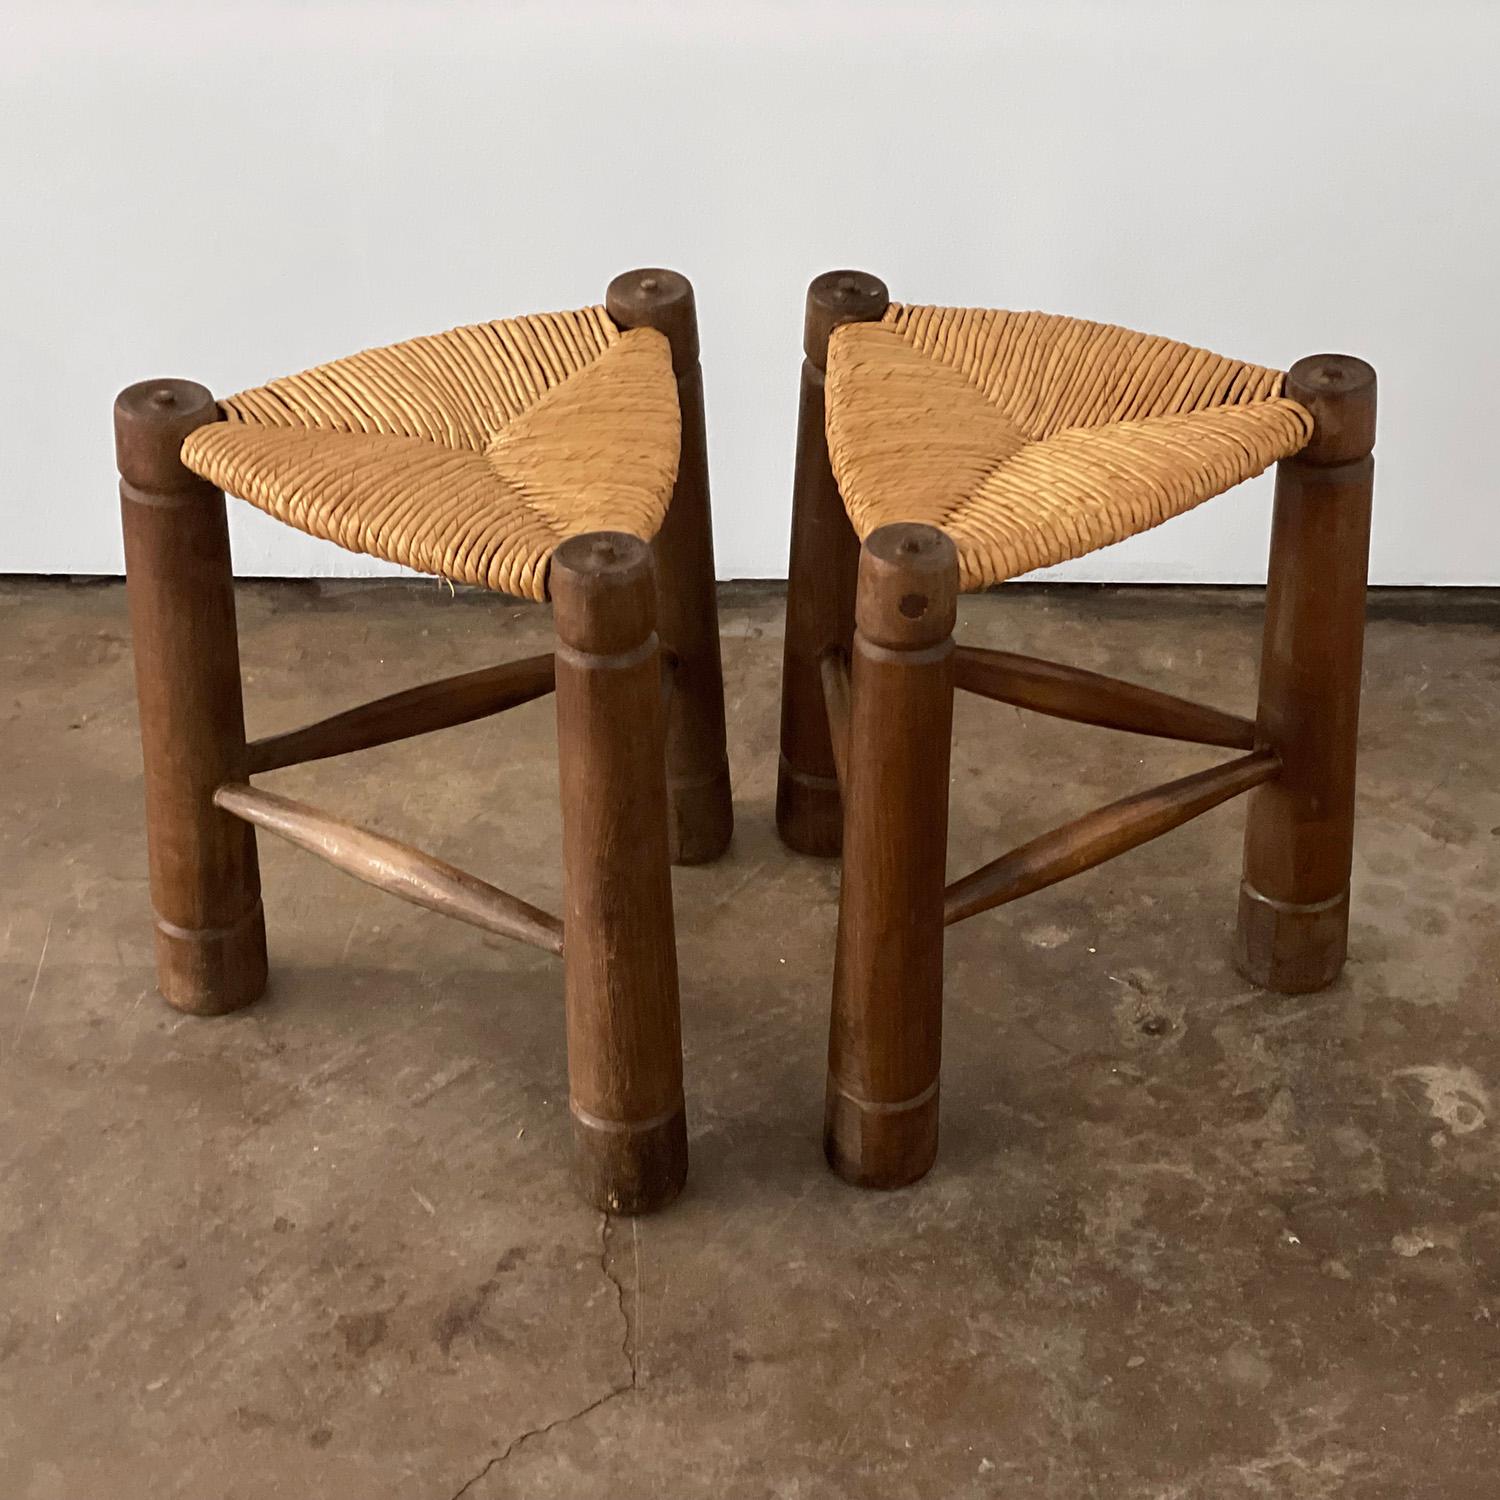 Charles Dudouyt french primitive stools
France, circa 1940's
Signature carved legs and natural woven seat
Patina from age and use 
Minor surface wear
Visible nail head as seen in photo
Sold as a pair
Additional Charles Dudouyt chairs and